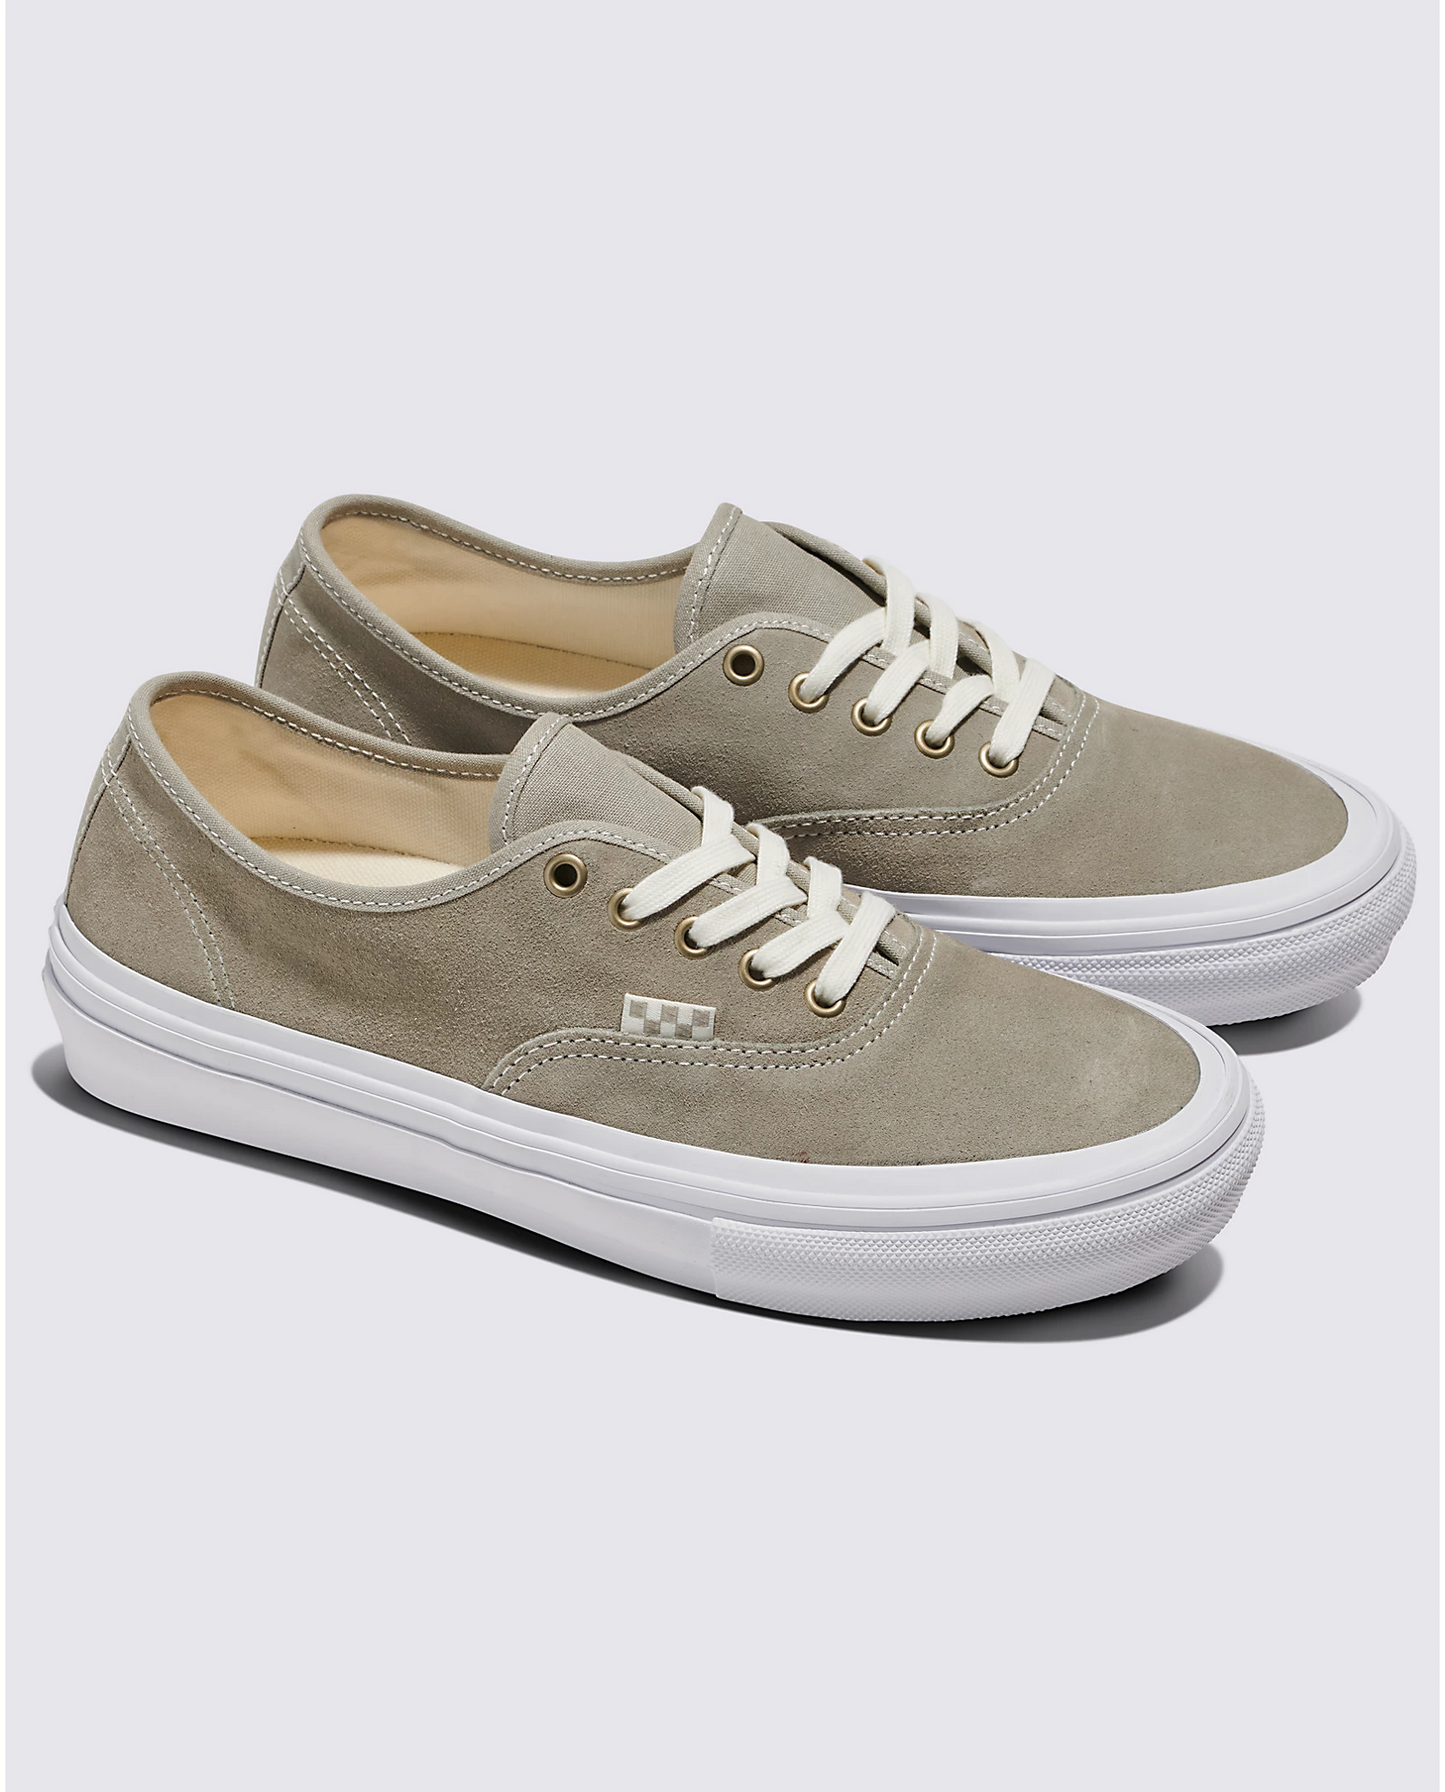 Vans Skate Authentic Wrapped Shoes